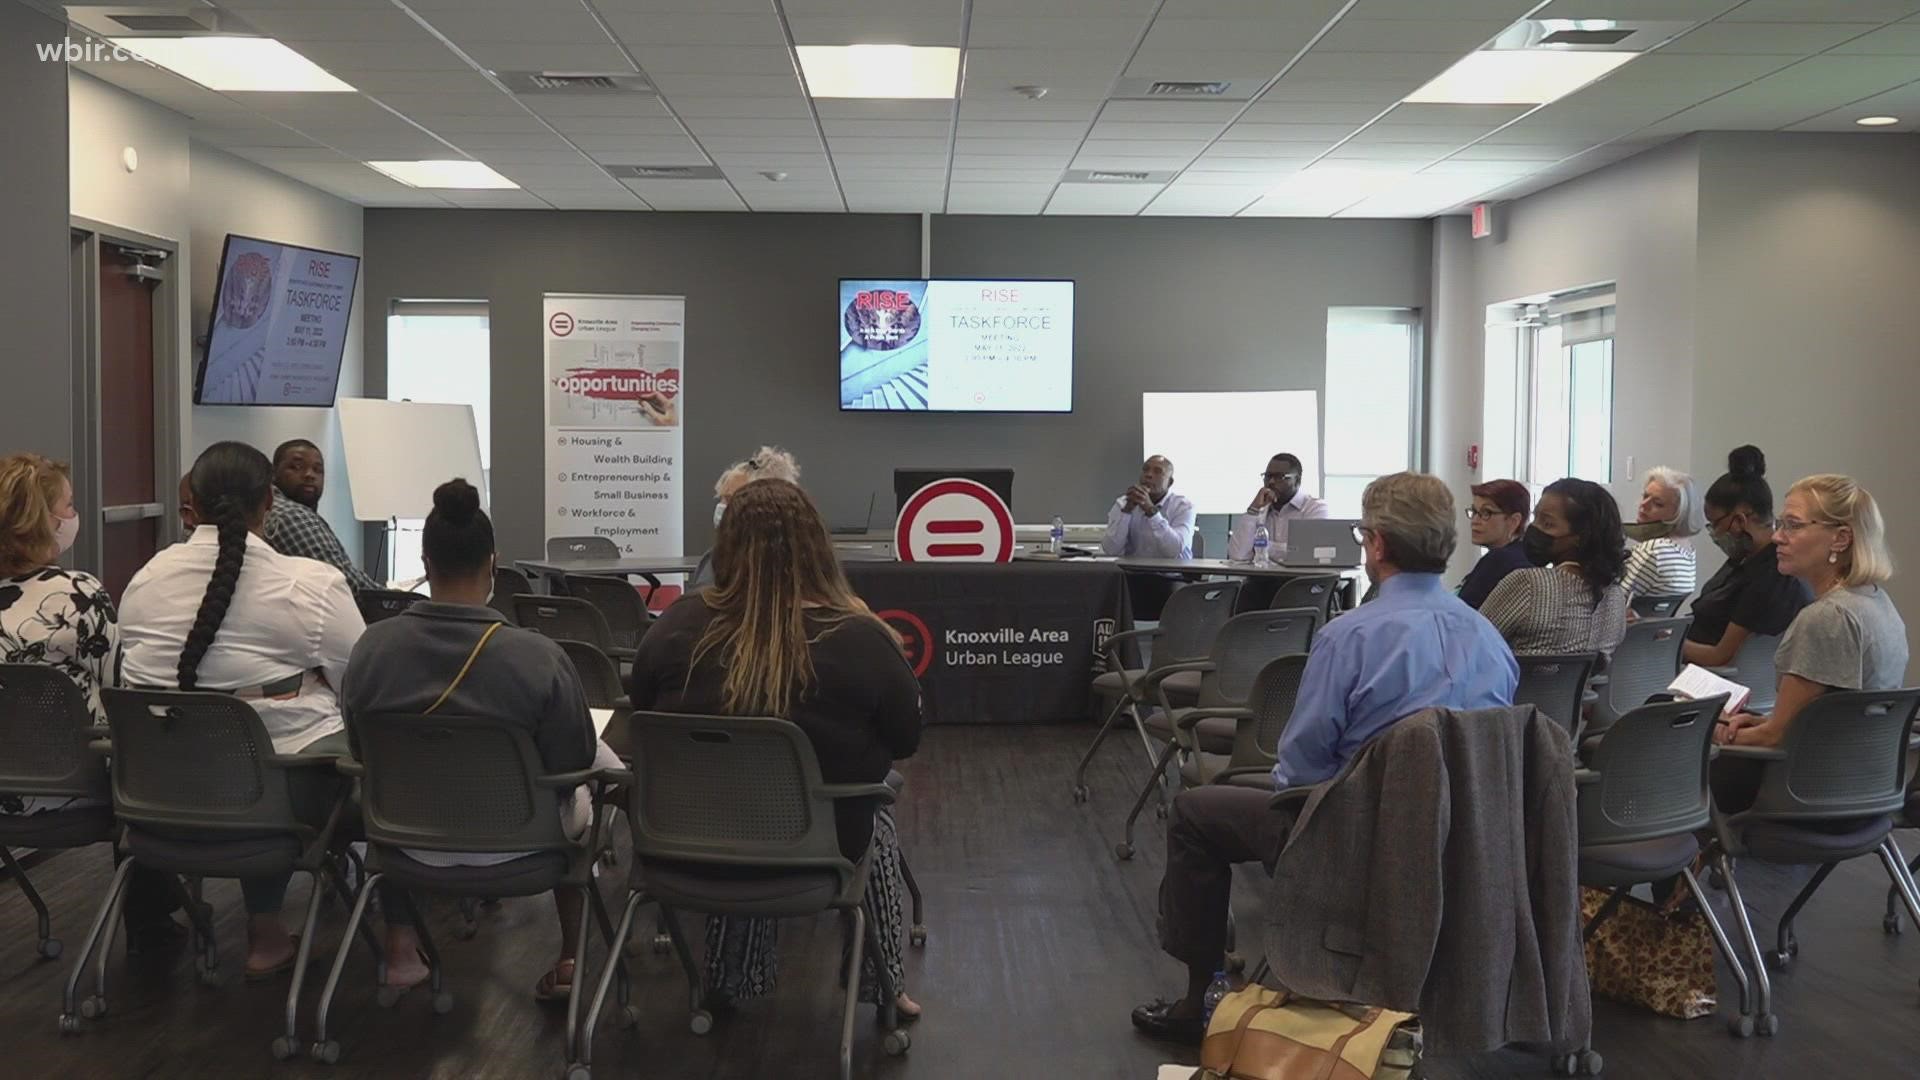 Knoxville Area Urban League hosted Tennessee labor officials to help formerly incarcerated people reenter the workforce and find stability in their lives.